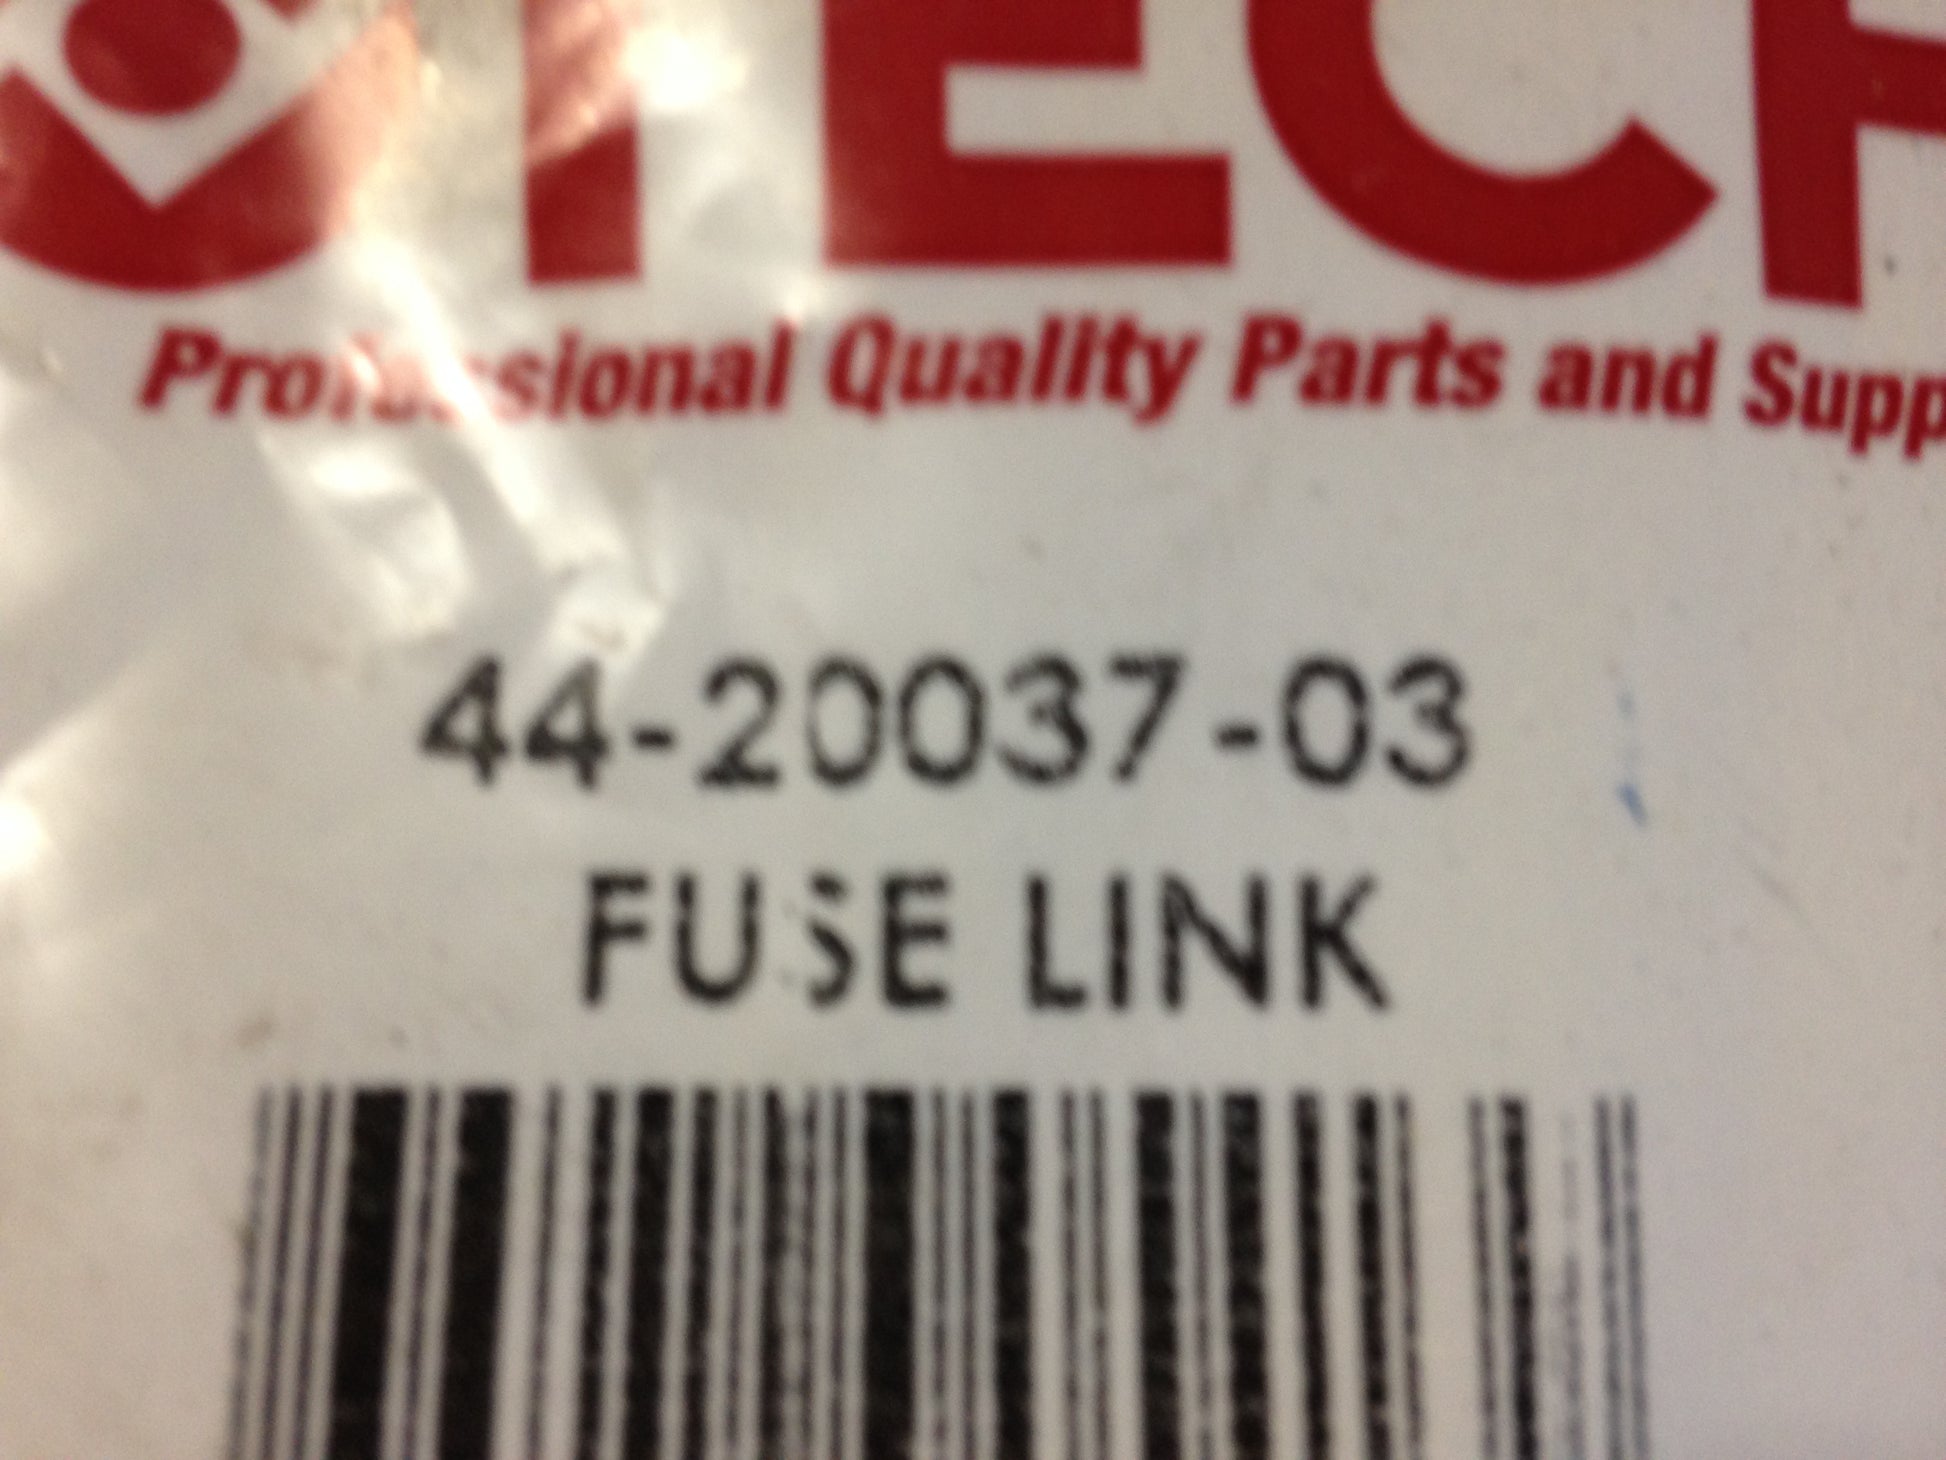 FUSE LINK OPENS @ 333F